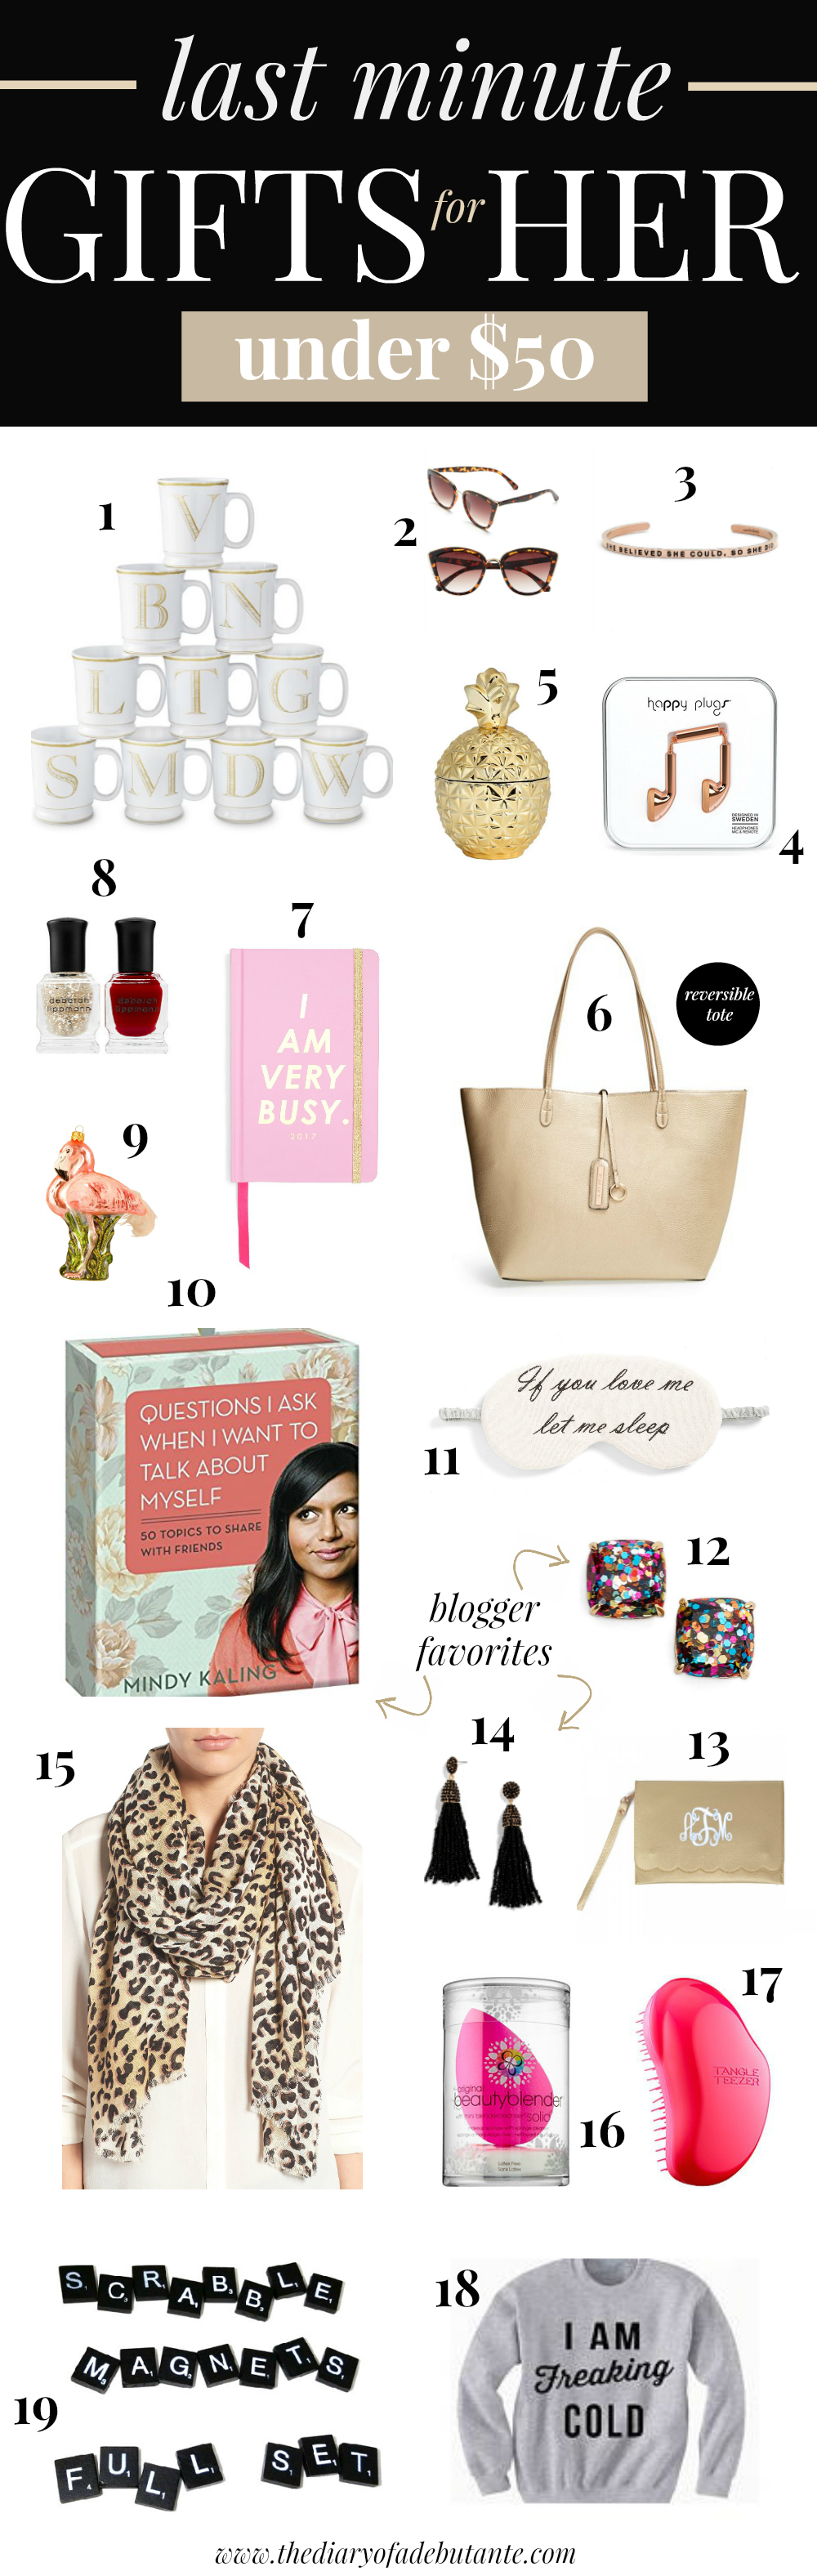 Last minute gifts for her under $50